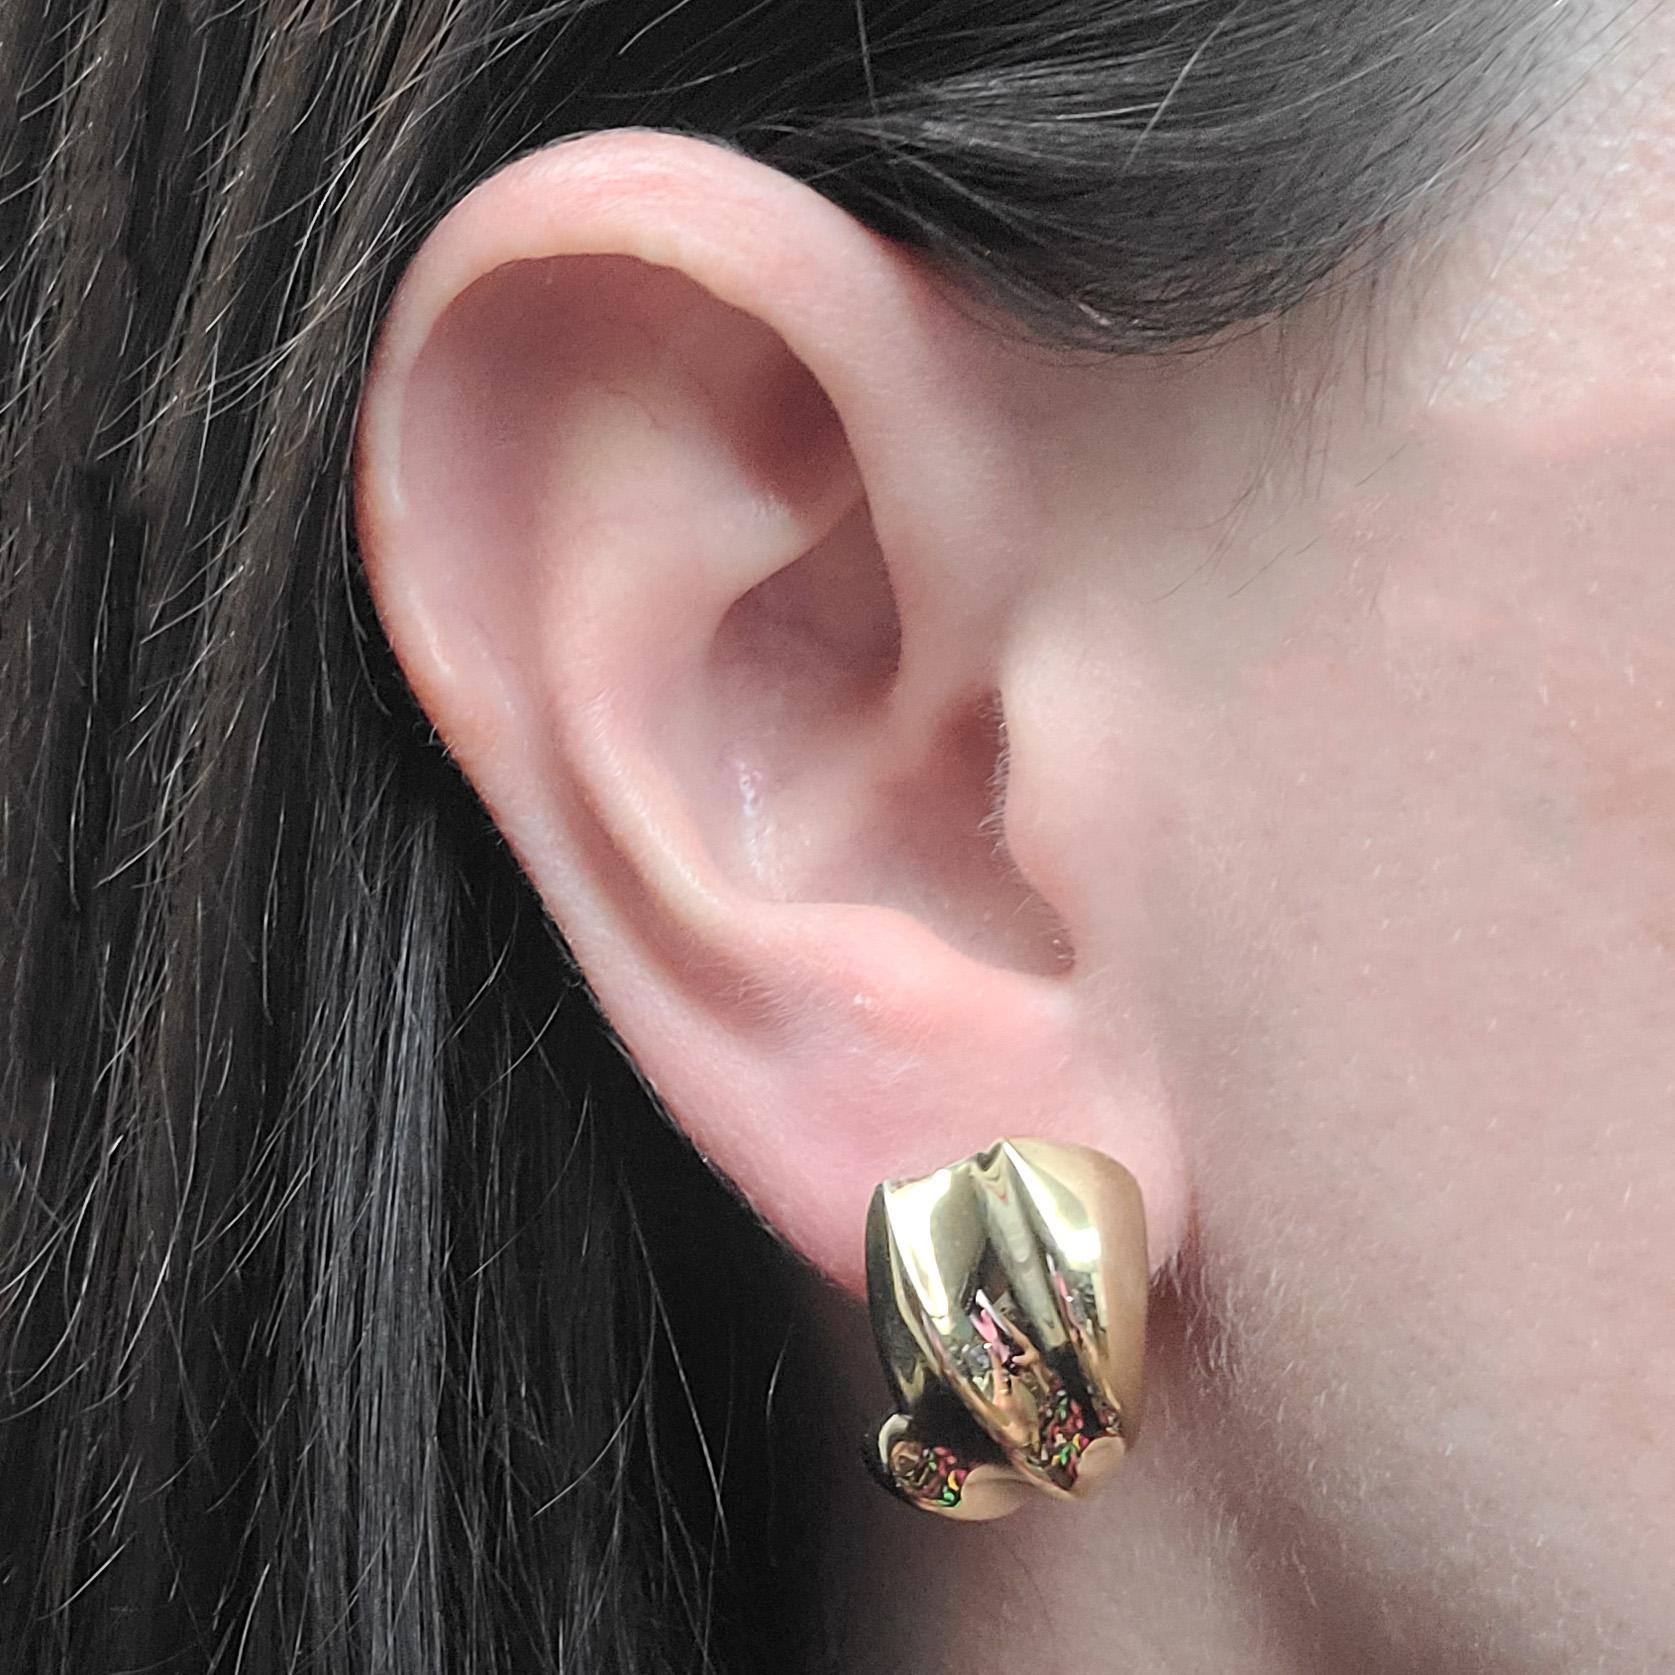 18 Karat Yellow Gold Earrings Featuring A Polished Carved Design. Pierced Post With Omega Clip Back. Post Can Be Removed Upon Request. Finished Weight Is 9.8 Grams.